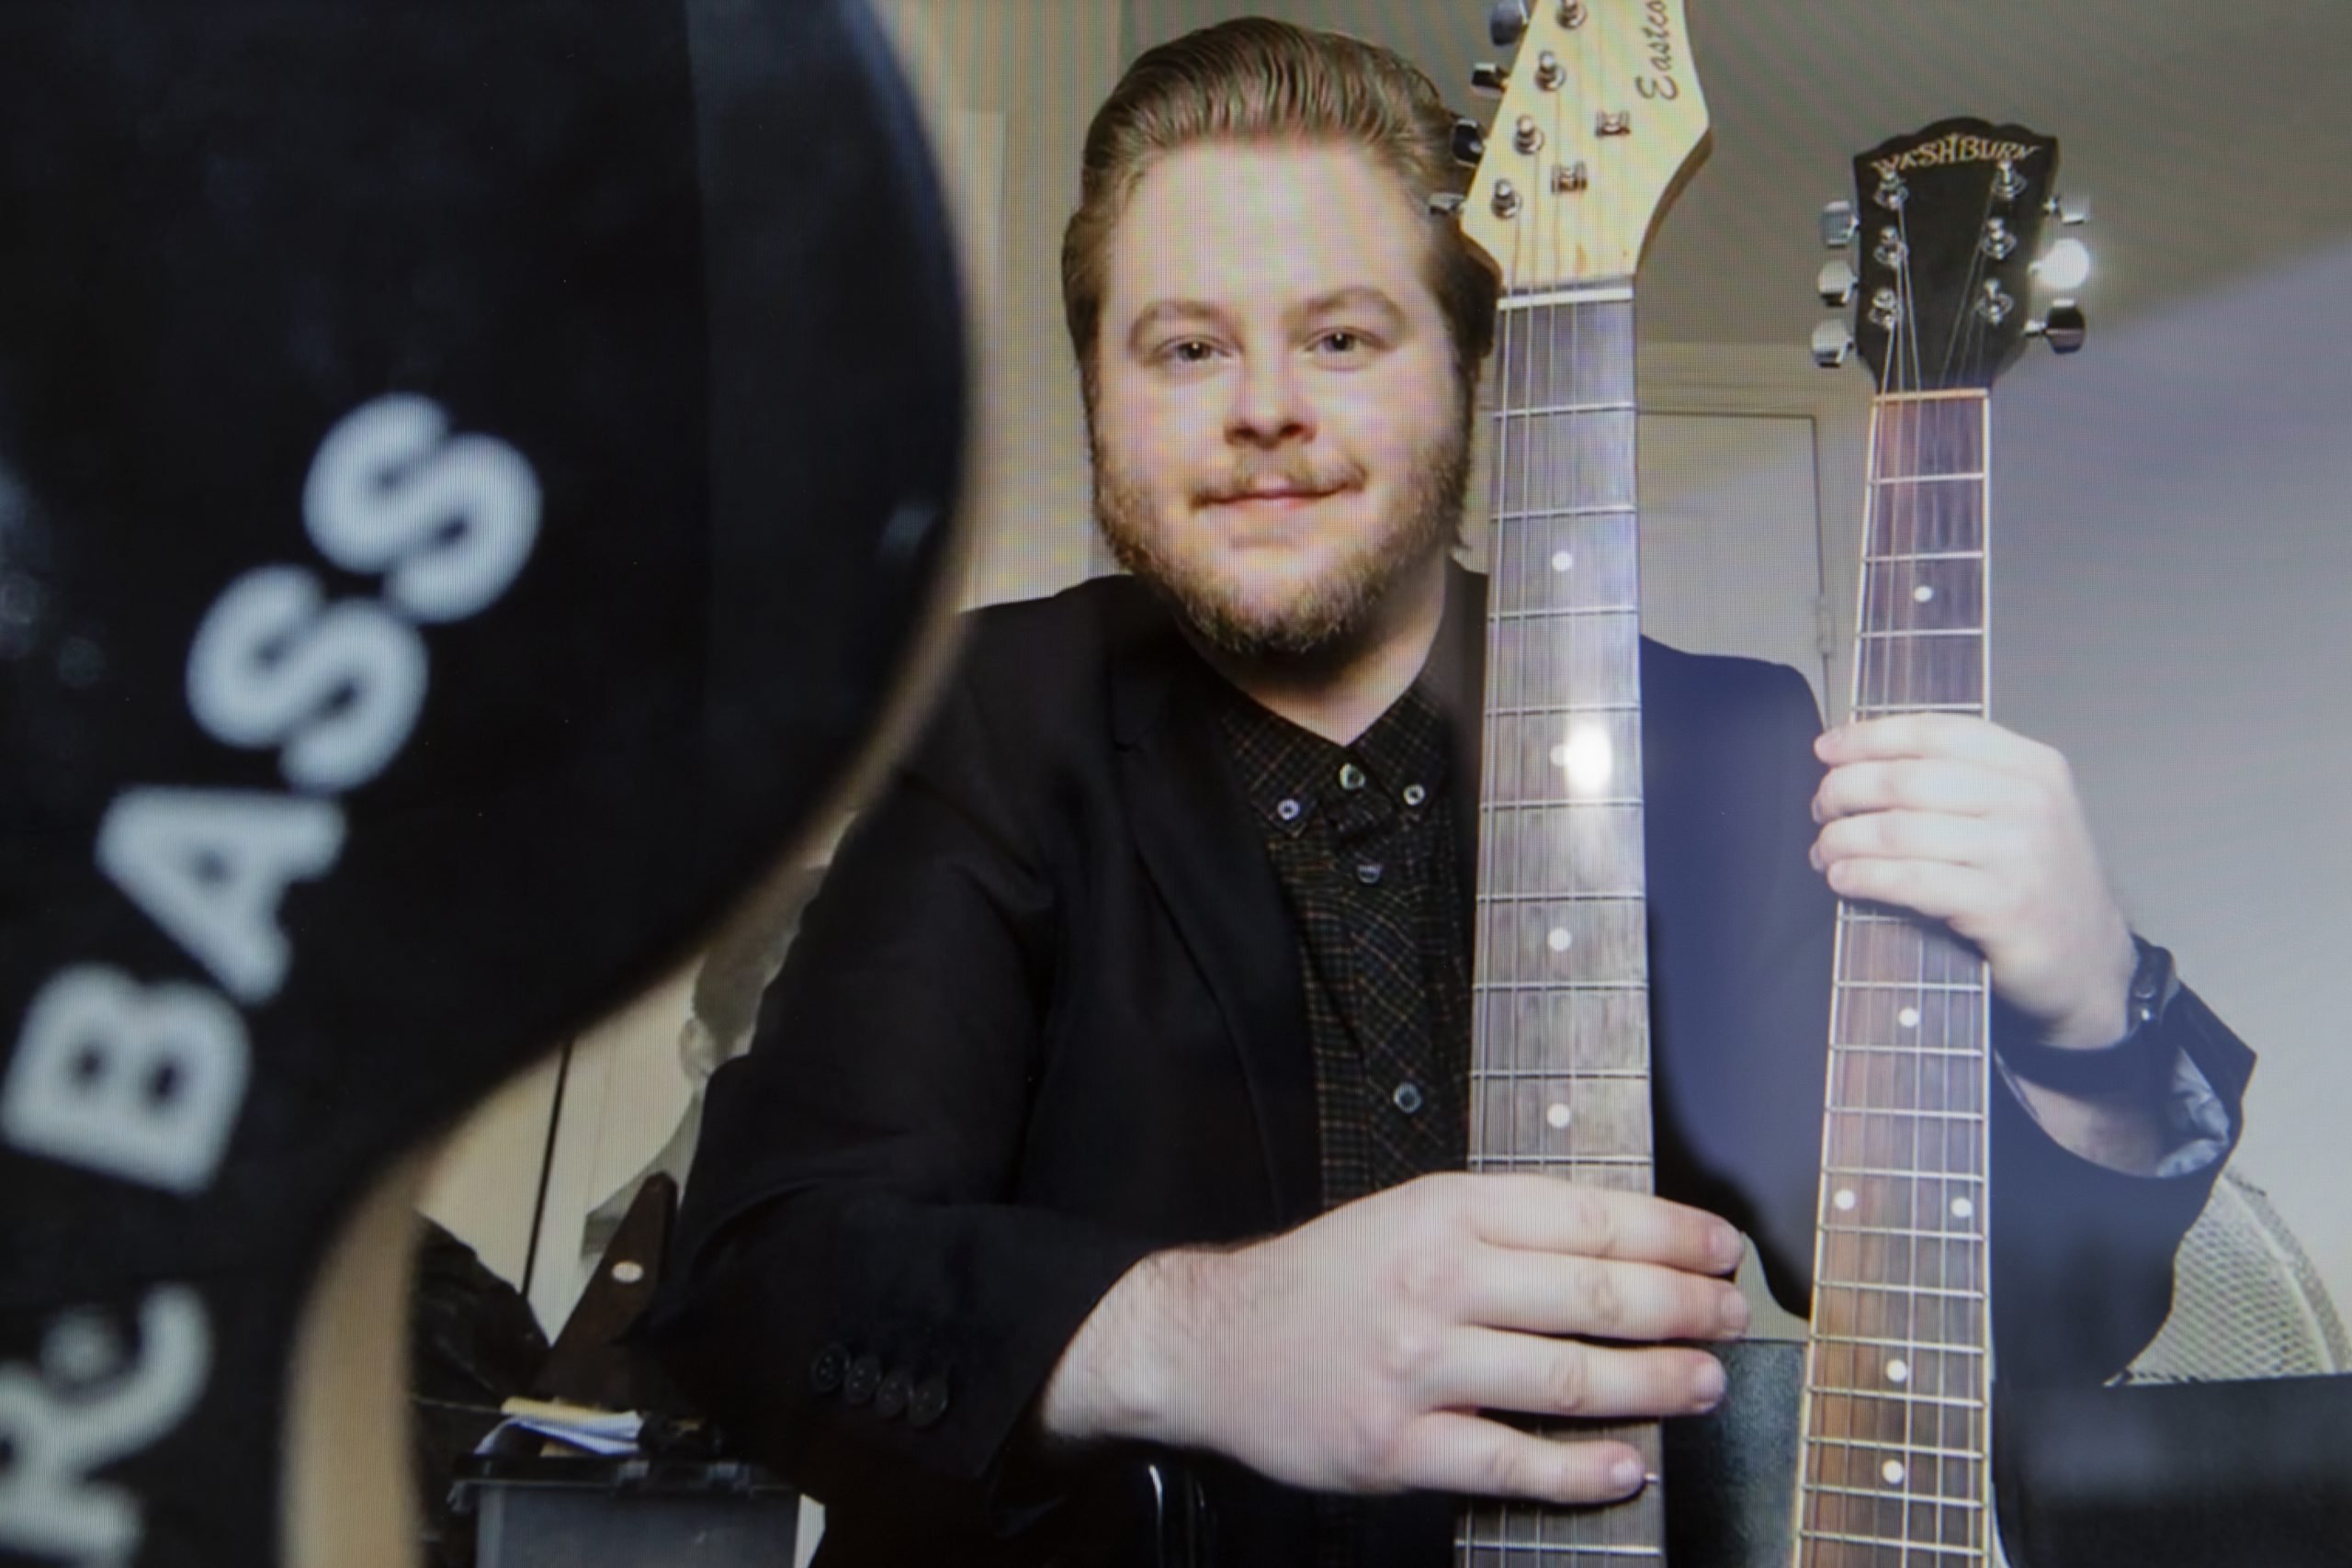 Jude Taylor is a white man with sandy blonde hair swept back off his face and a beard. He wears a black jacket and brown check shirt. To his right, he holds two guitars, their necks visible in the shot. To his left, a black object is at the forefront of the screen, with the word 'Bass' written on it.